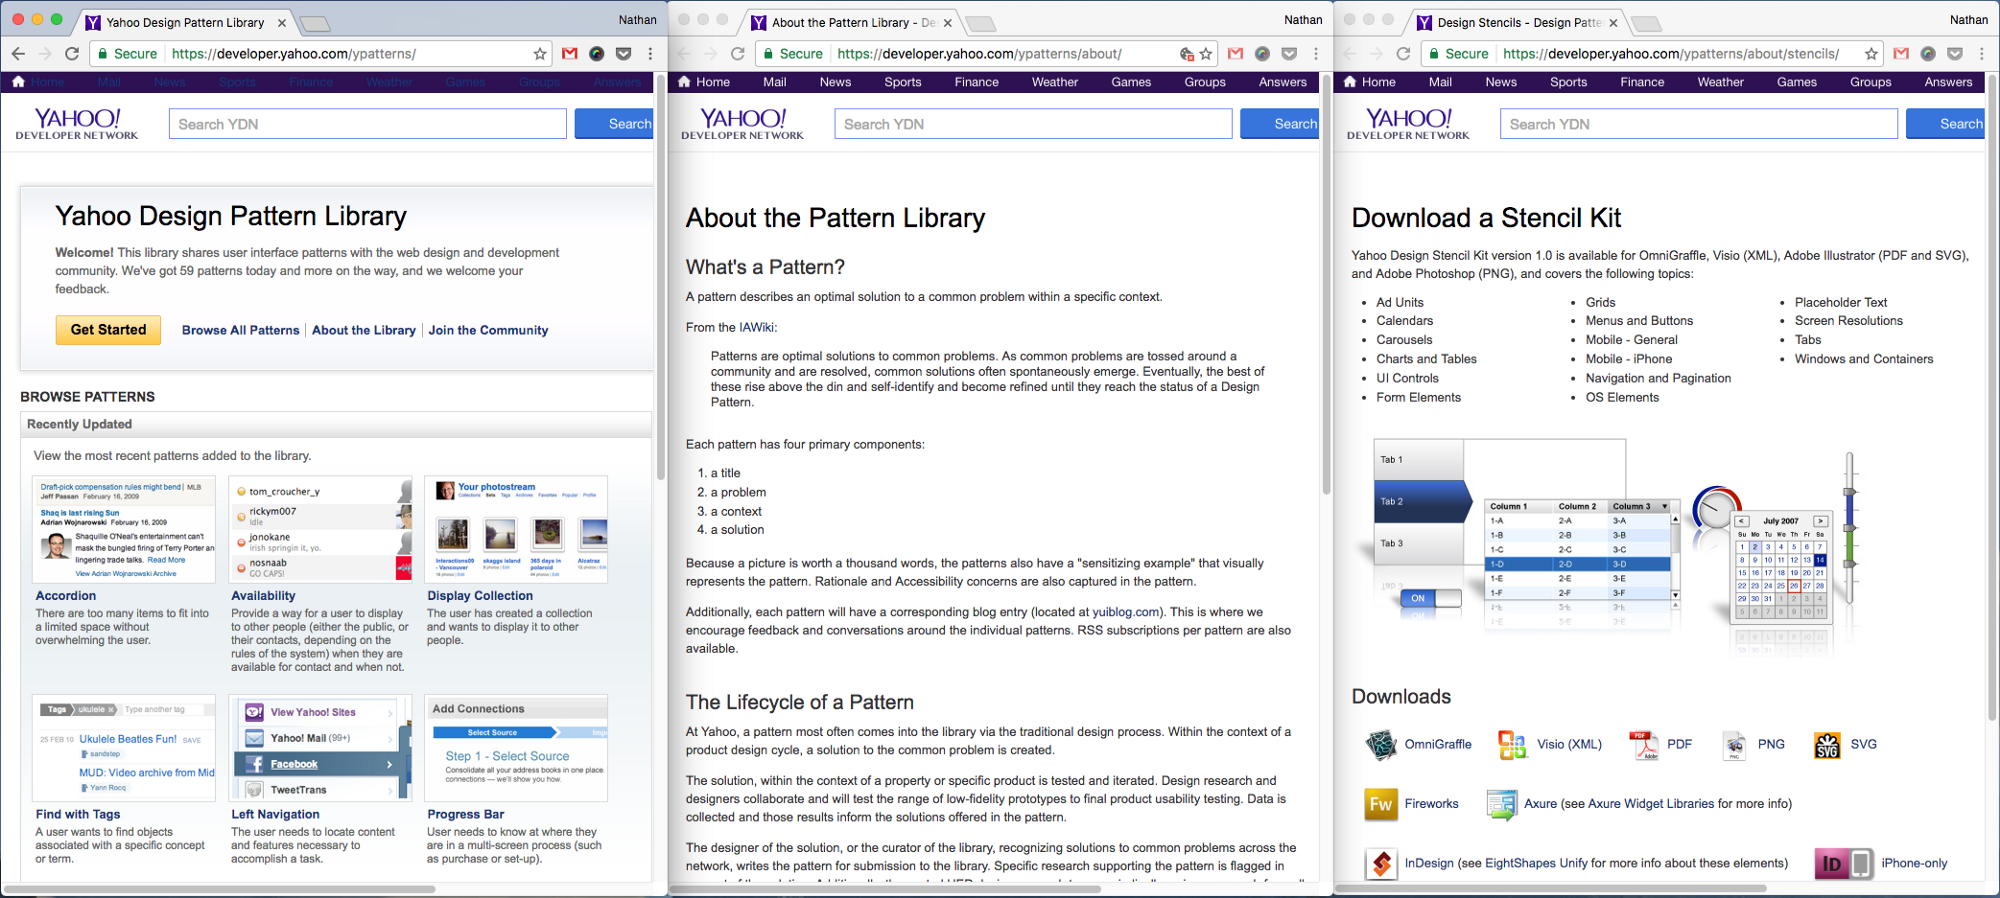 Screenshots of the Yahoo Pattern Library